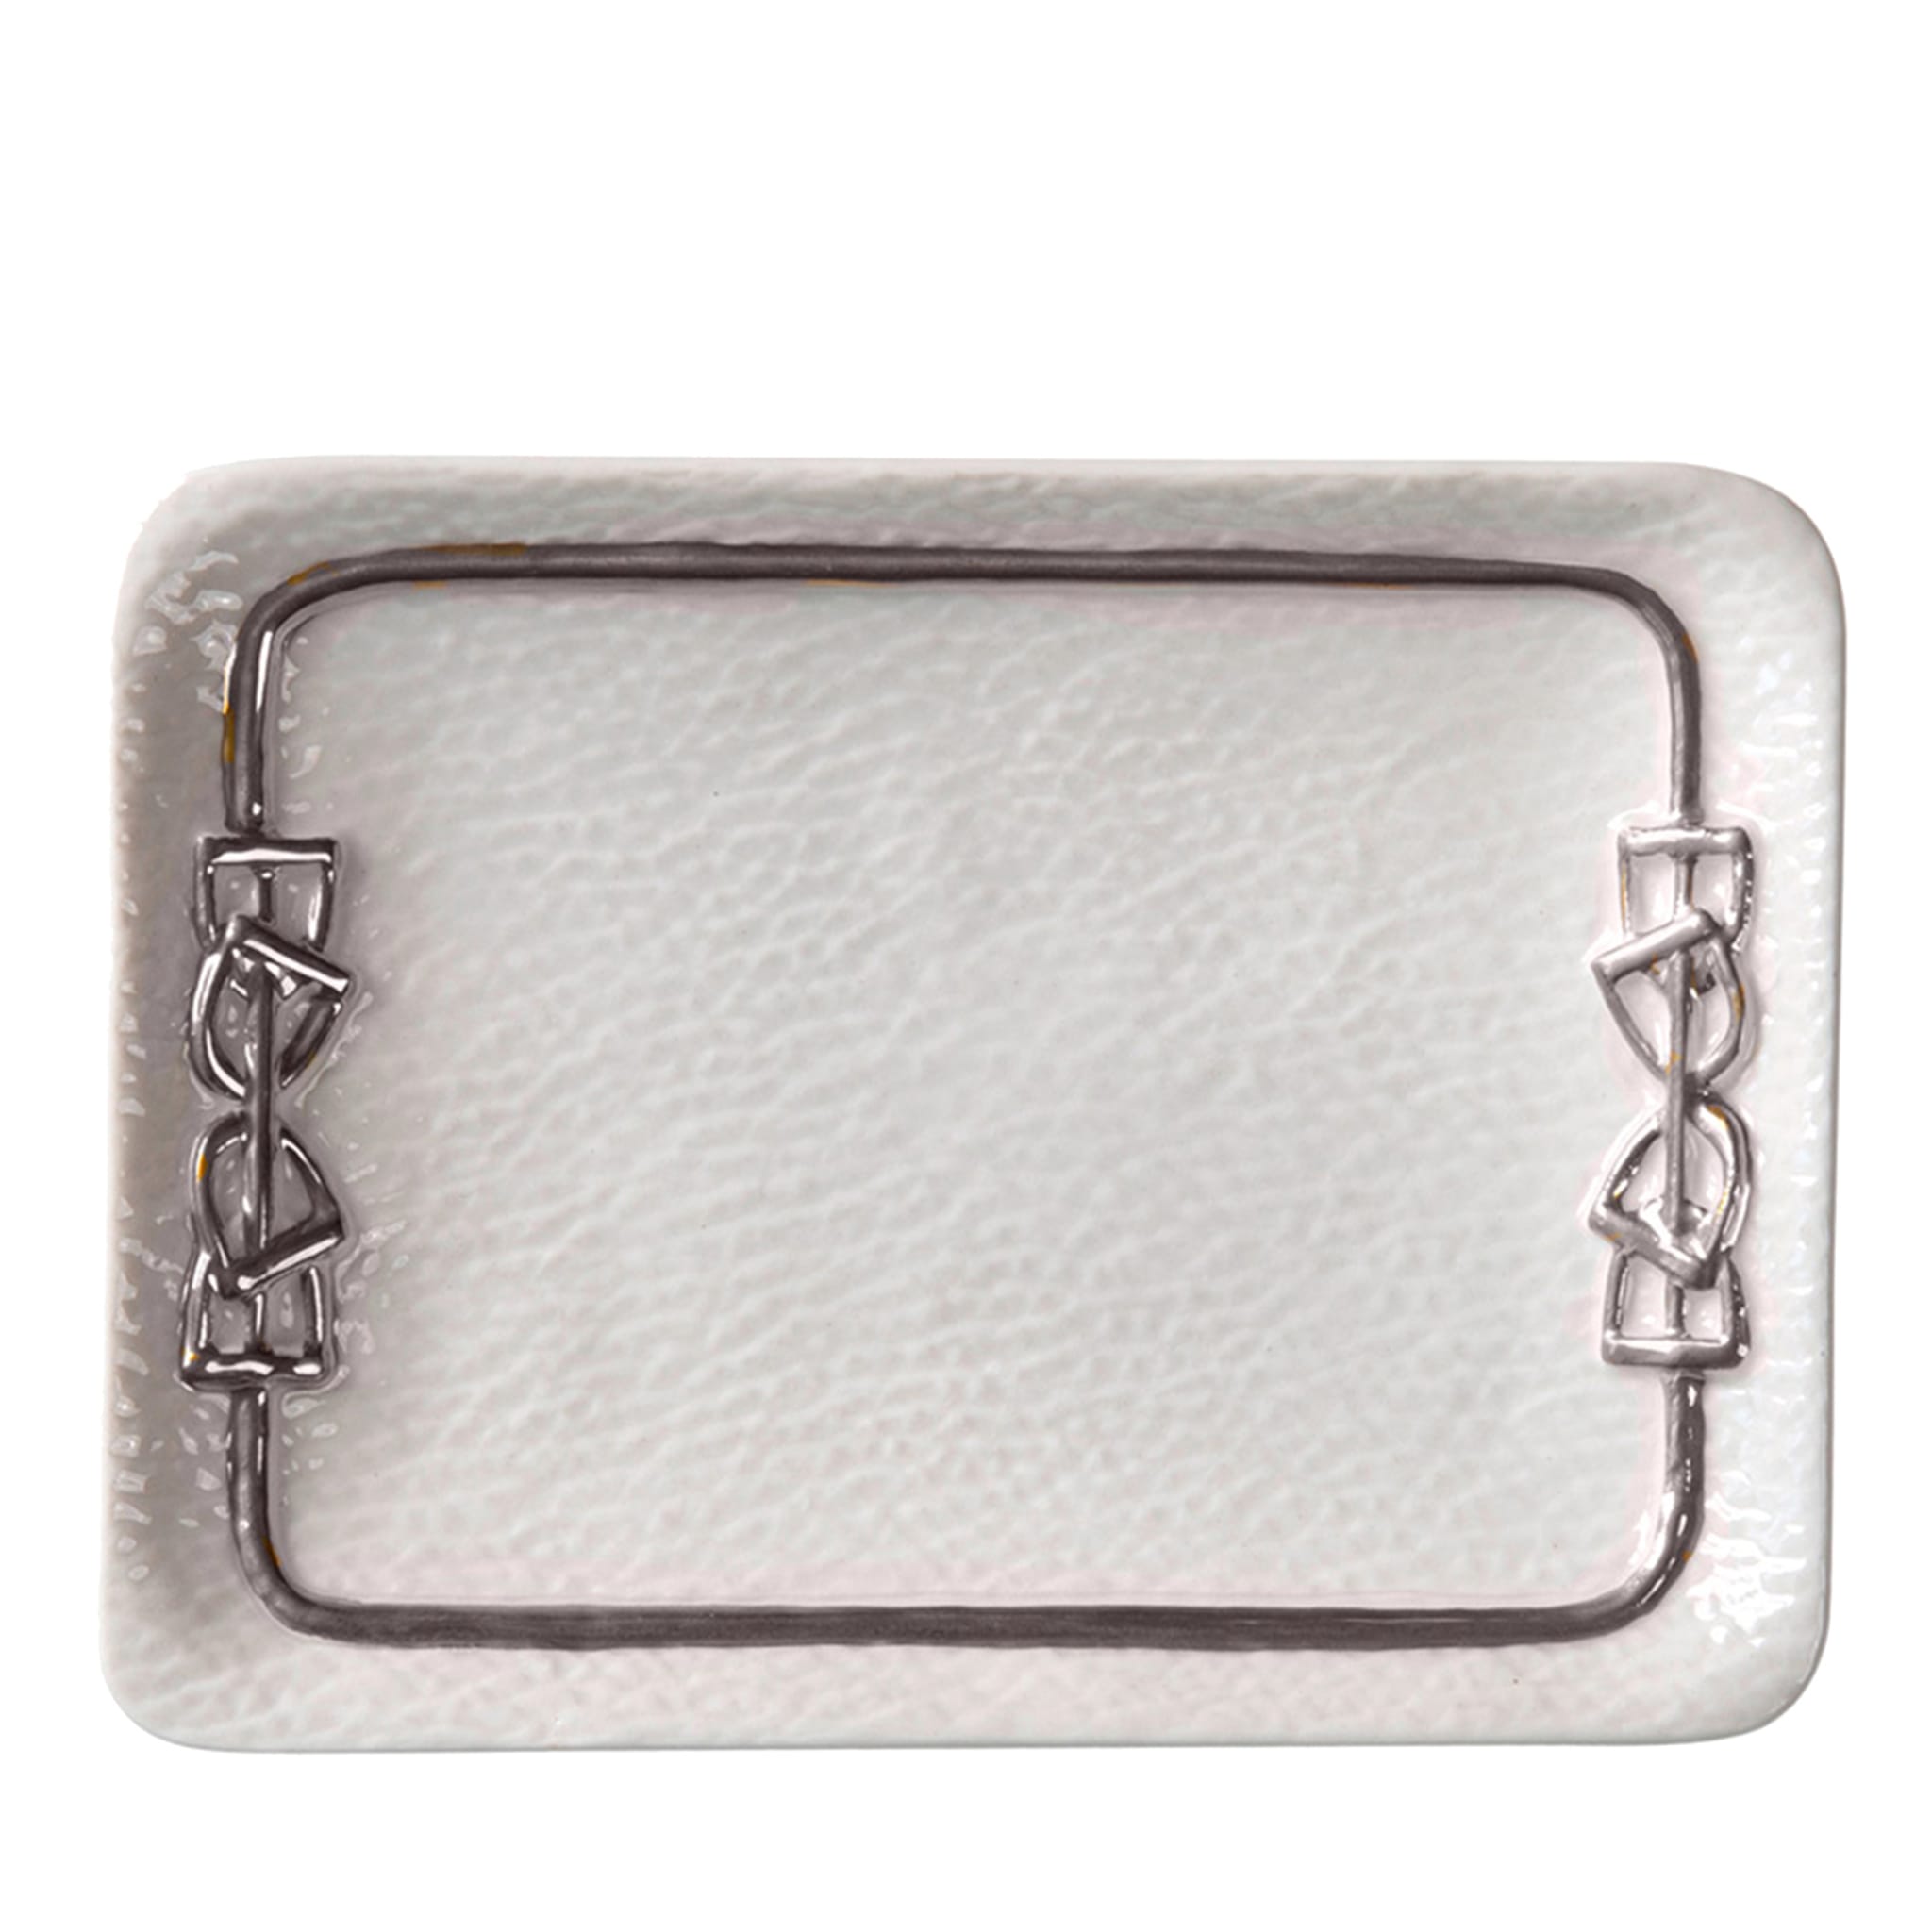 DRESSAGE SOAP DISH - WHITE AND SILVER - Main view